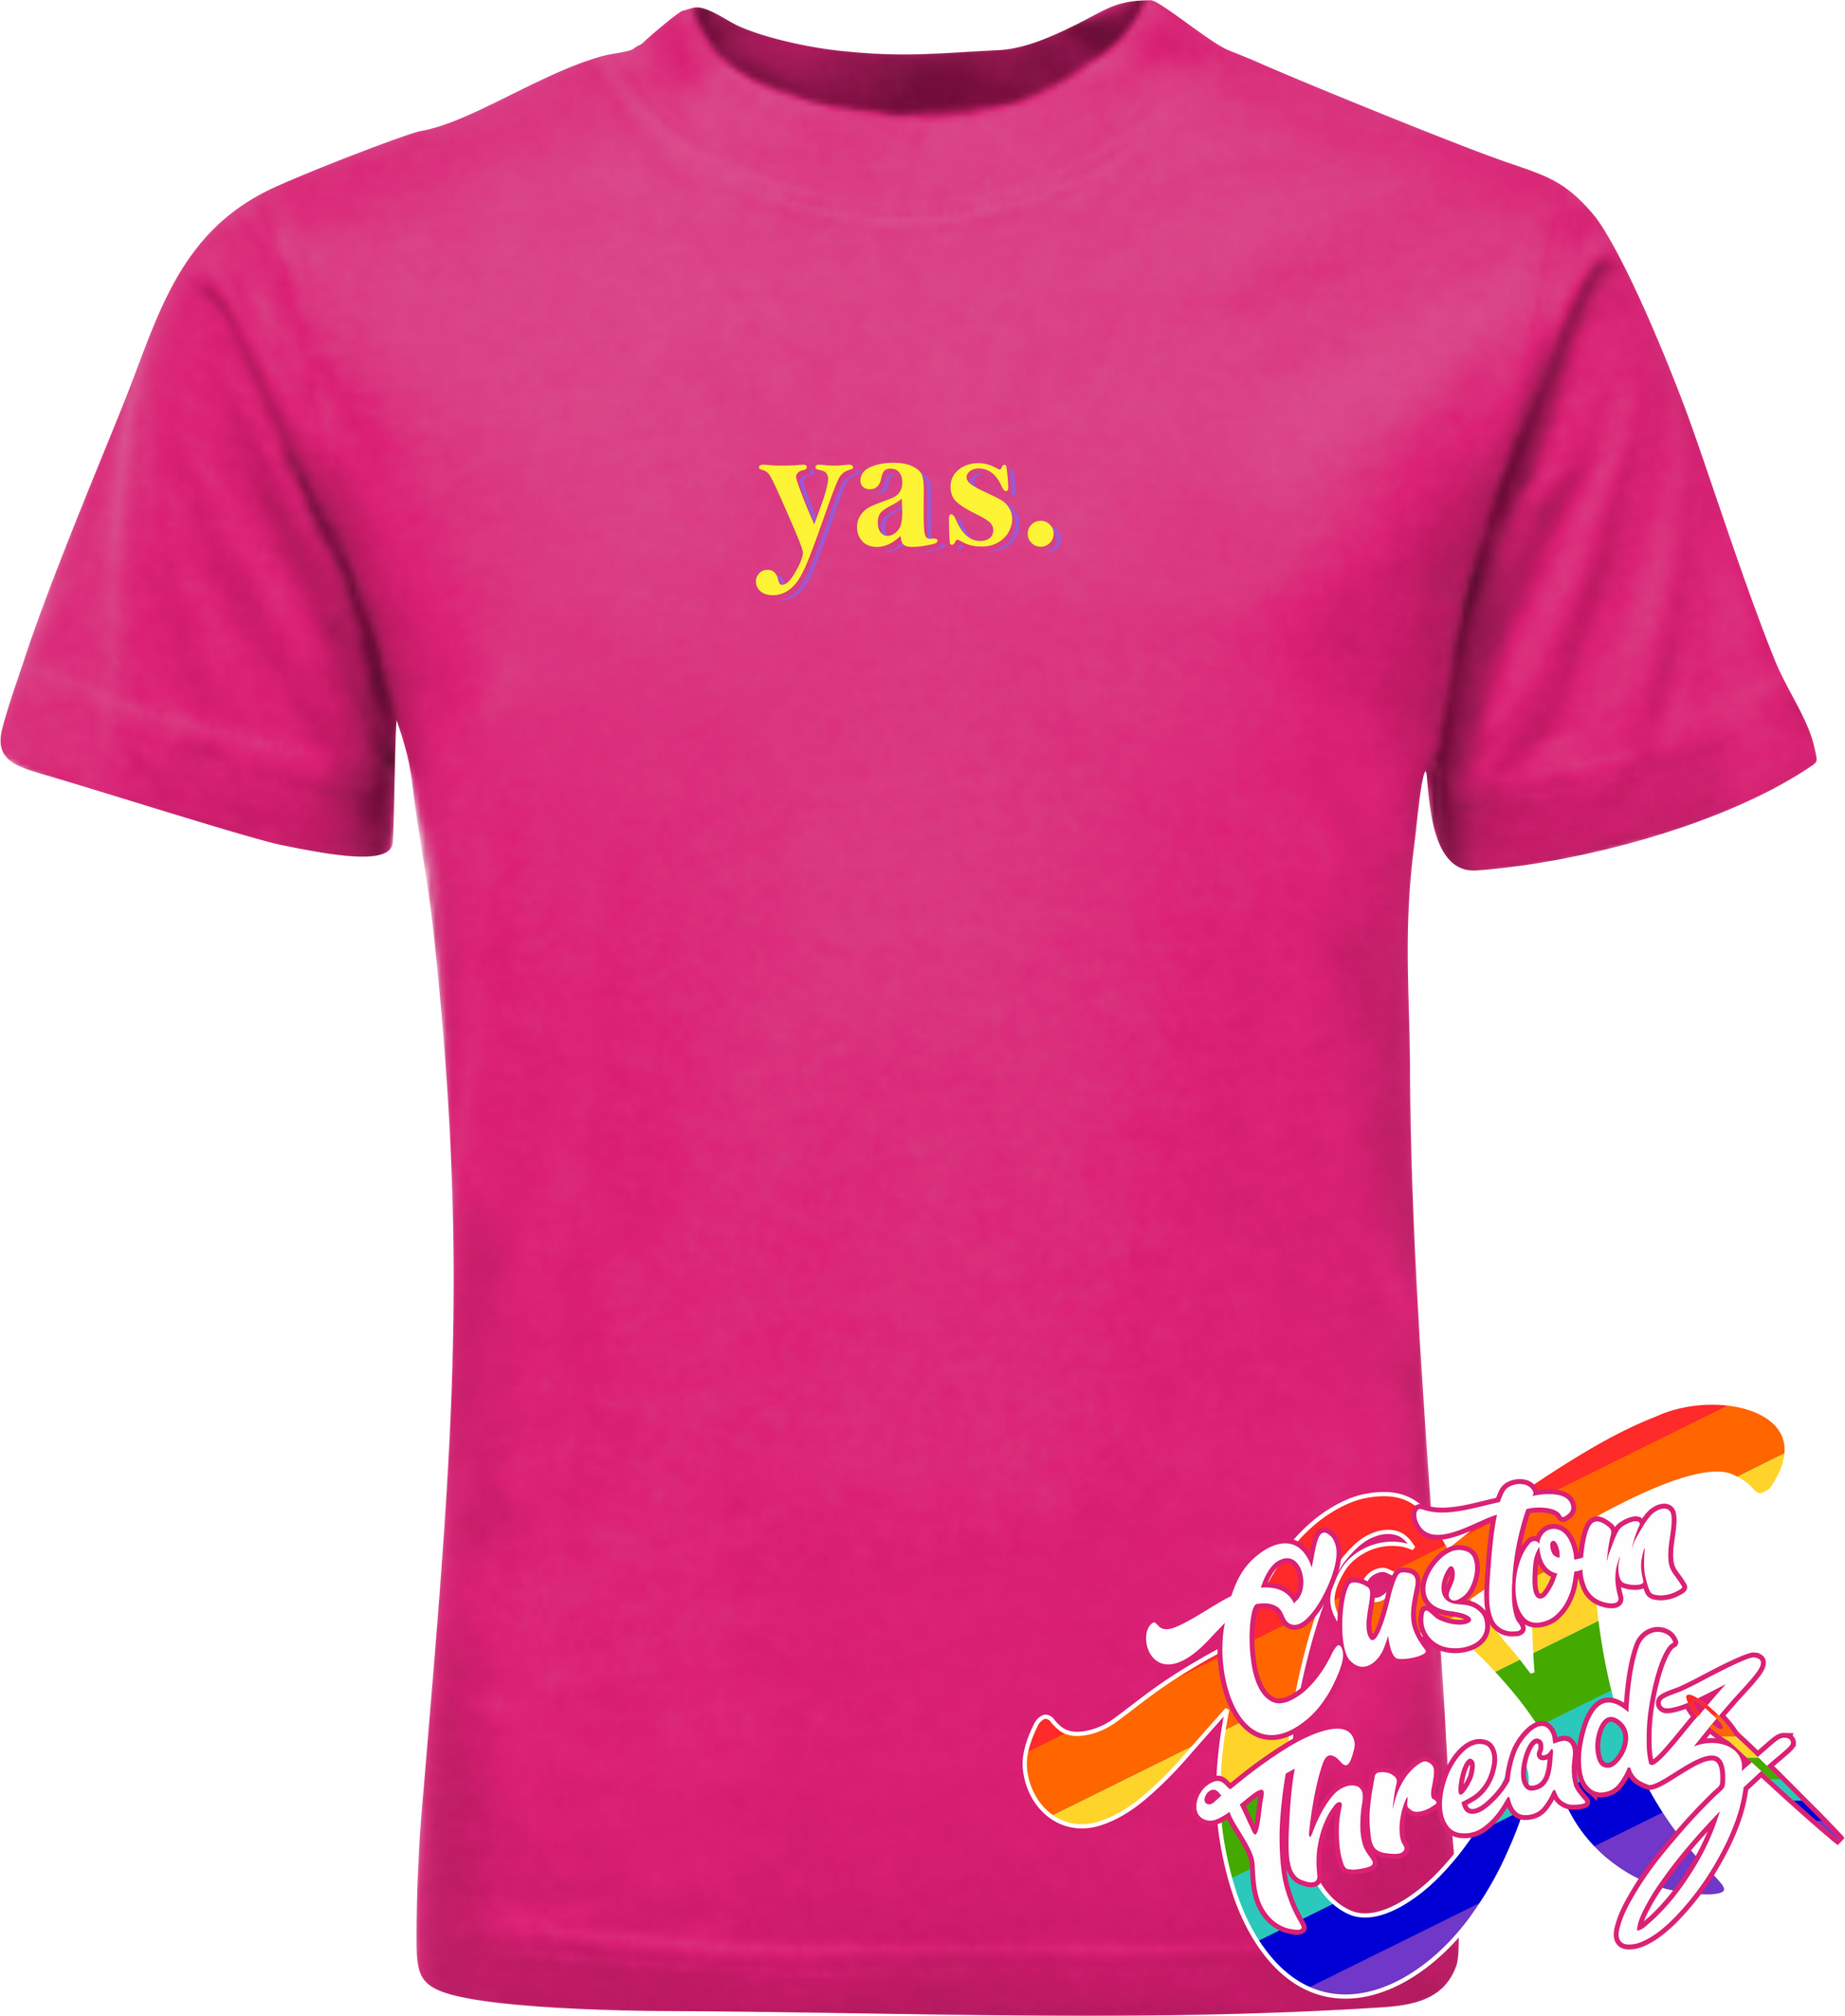 pink tee with yas DTG printed design